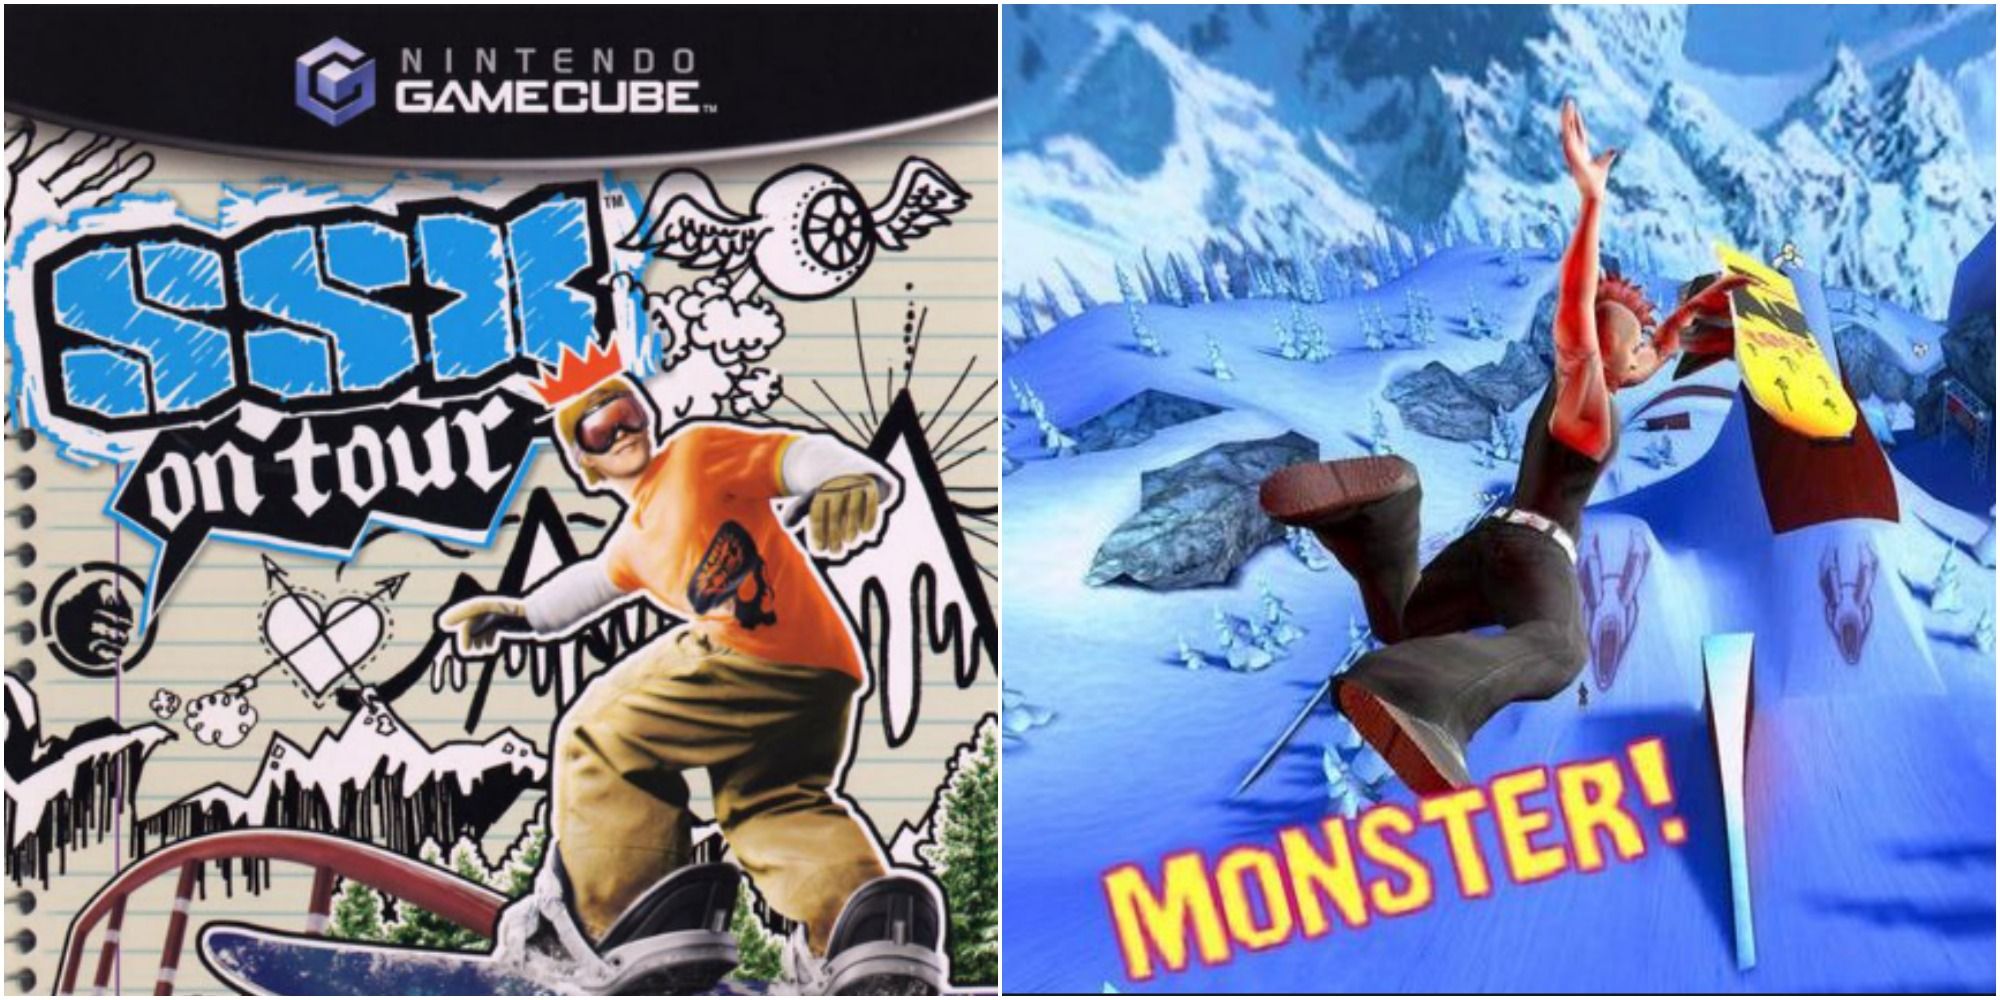 ssx on tour snowboarder box art and snowboarder pulling off awesome trick featured